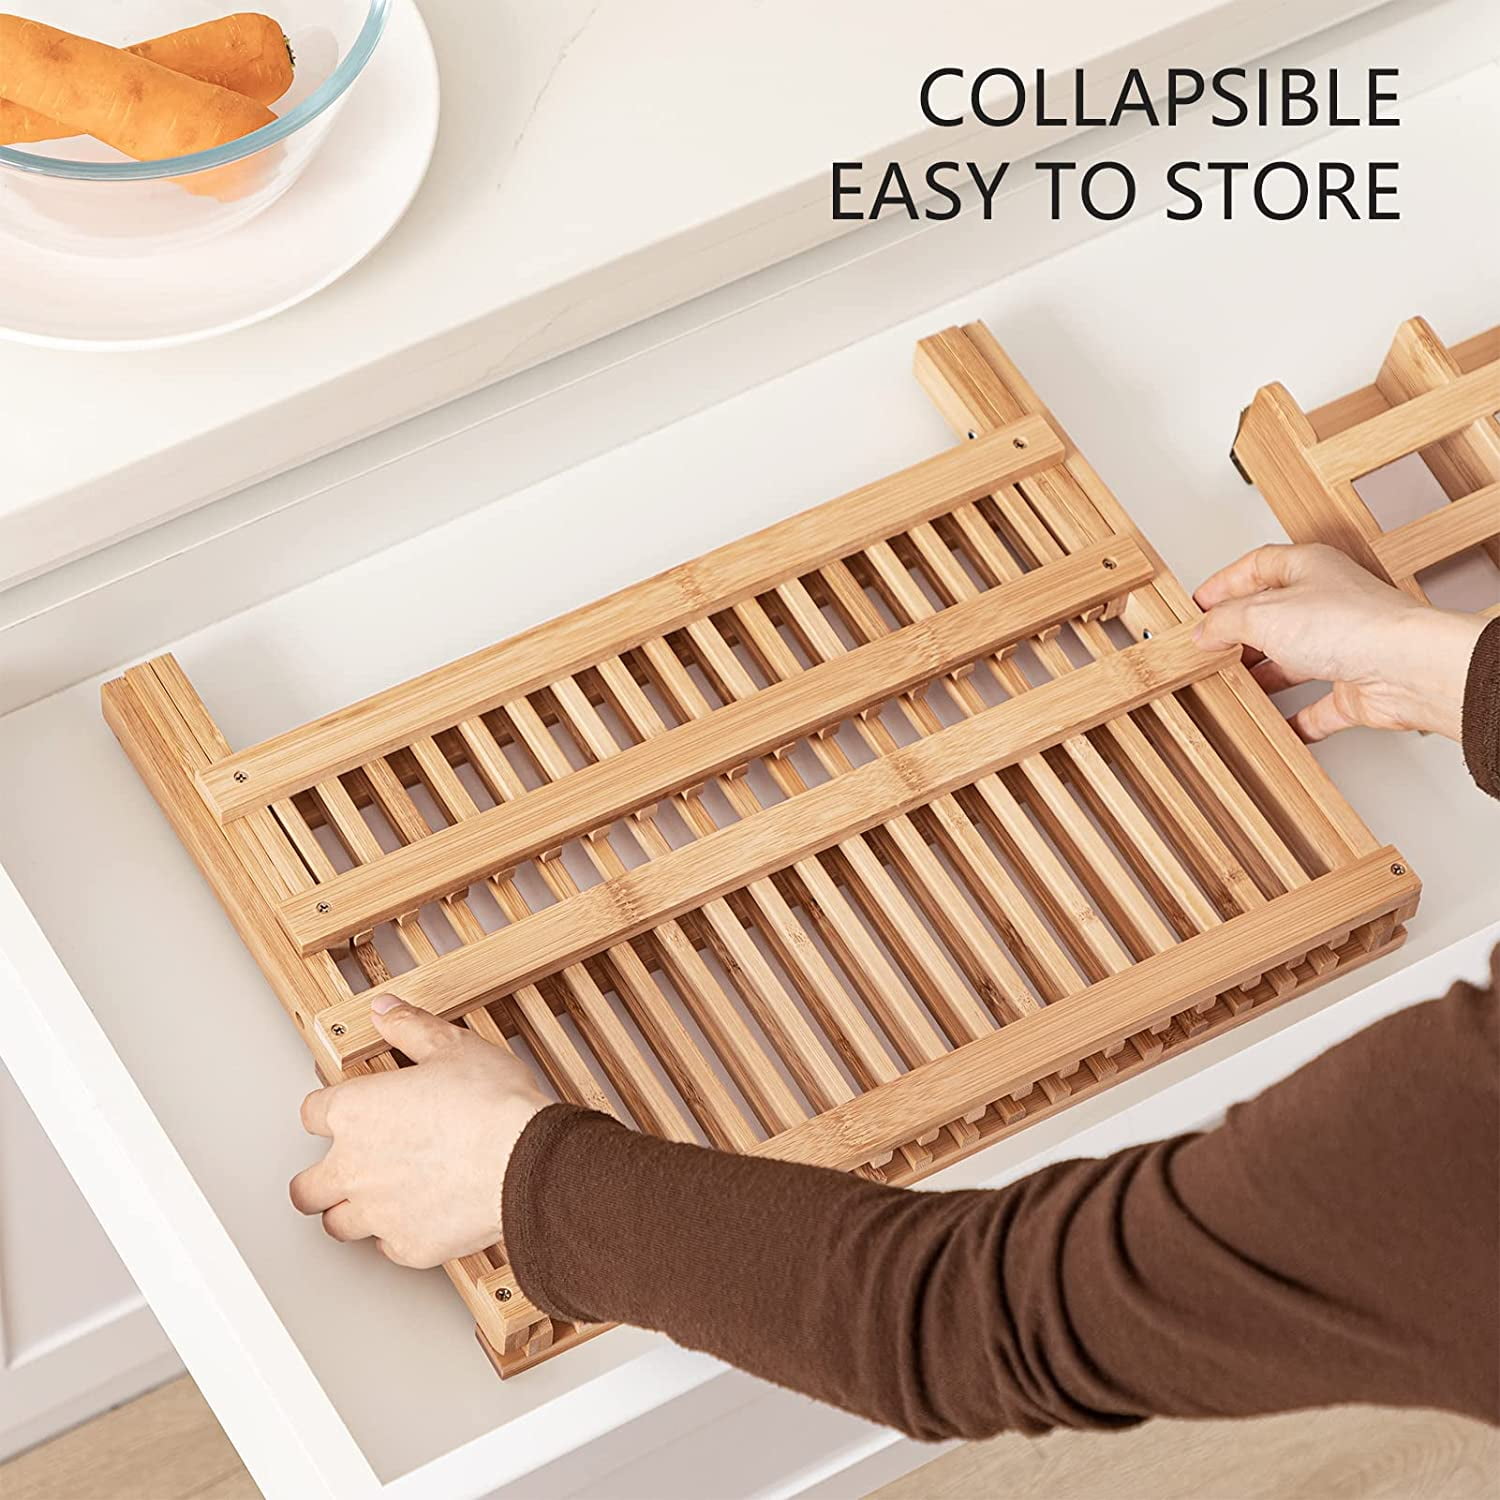 NOVAYEAH Bamboo Dish Drying Rack with Utensil Holder, Collapsible